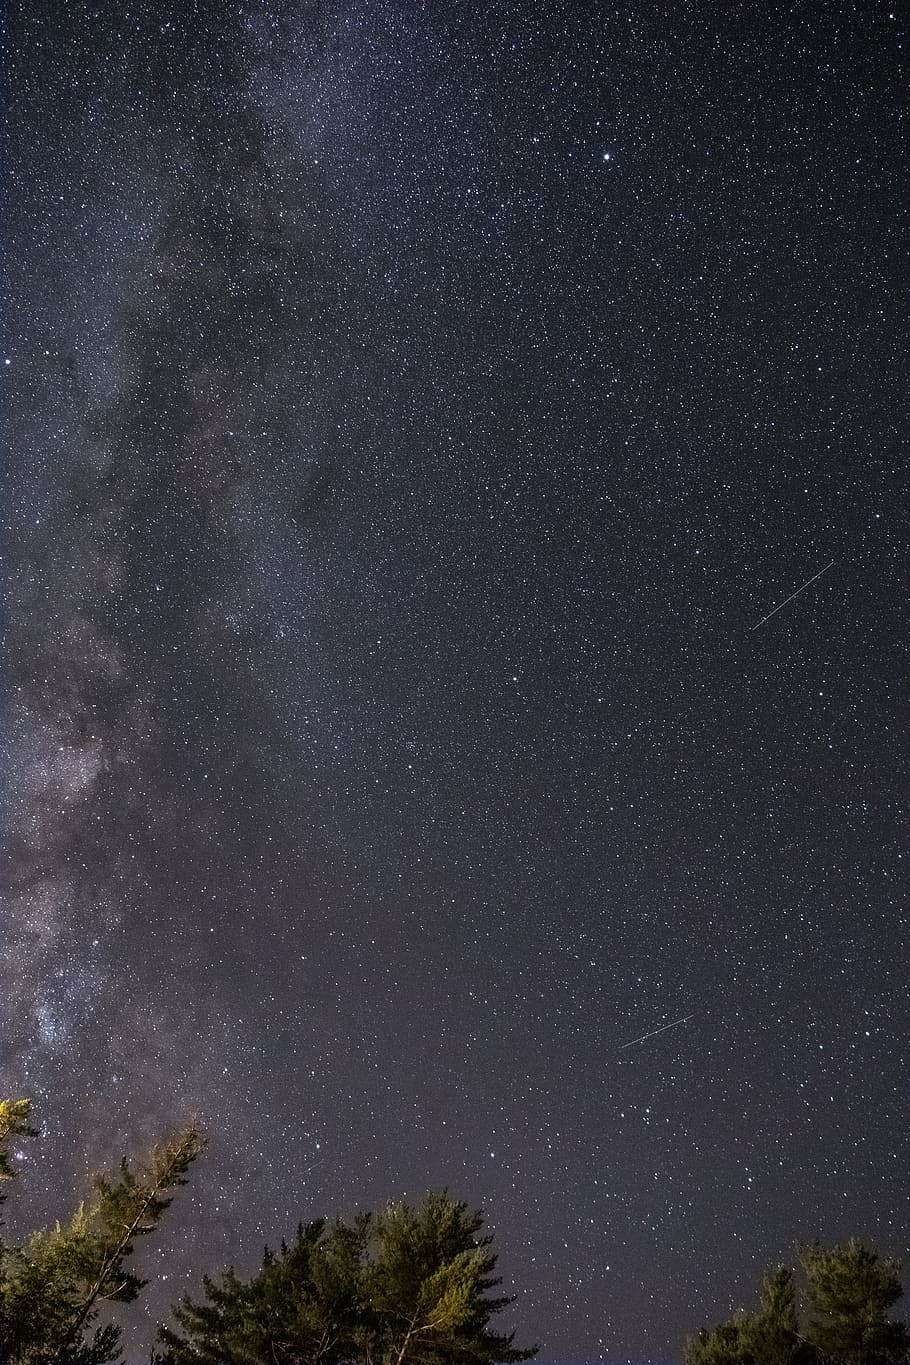 cluster of stars, sky, tree, galaxy, shooting star, astrophotography